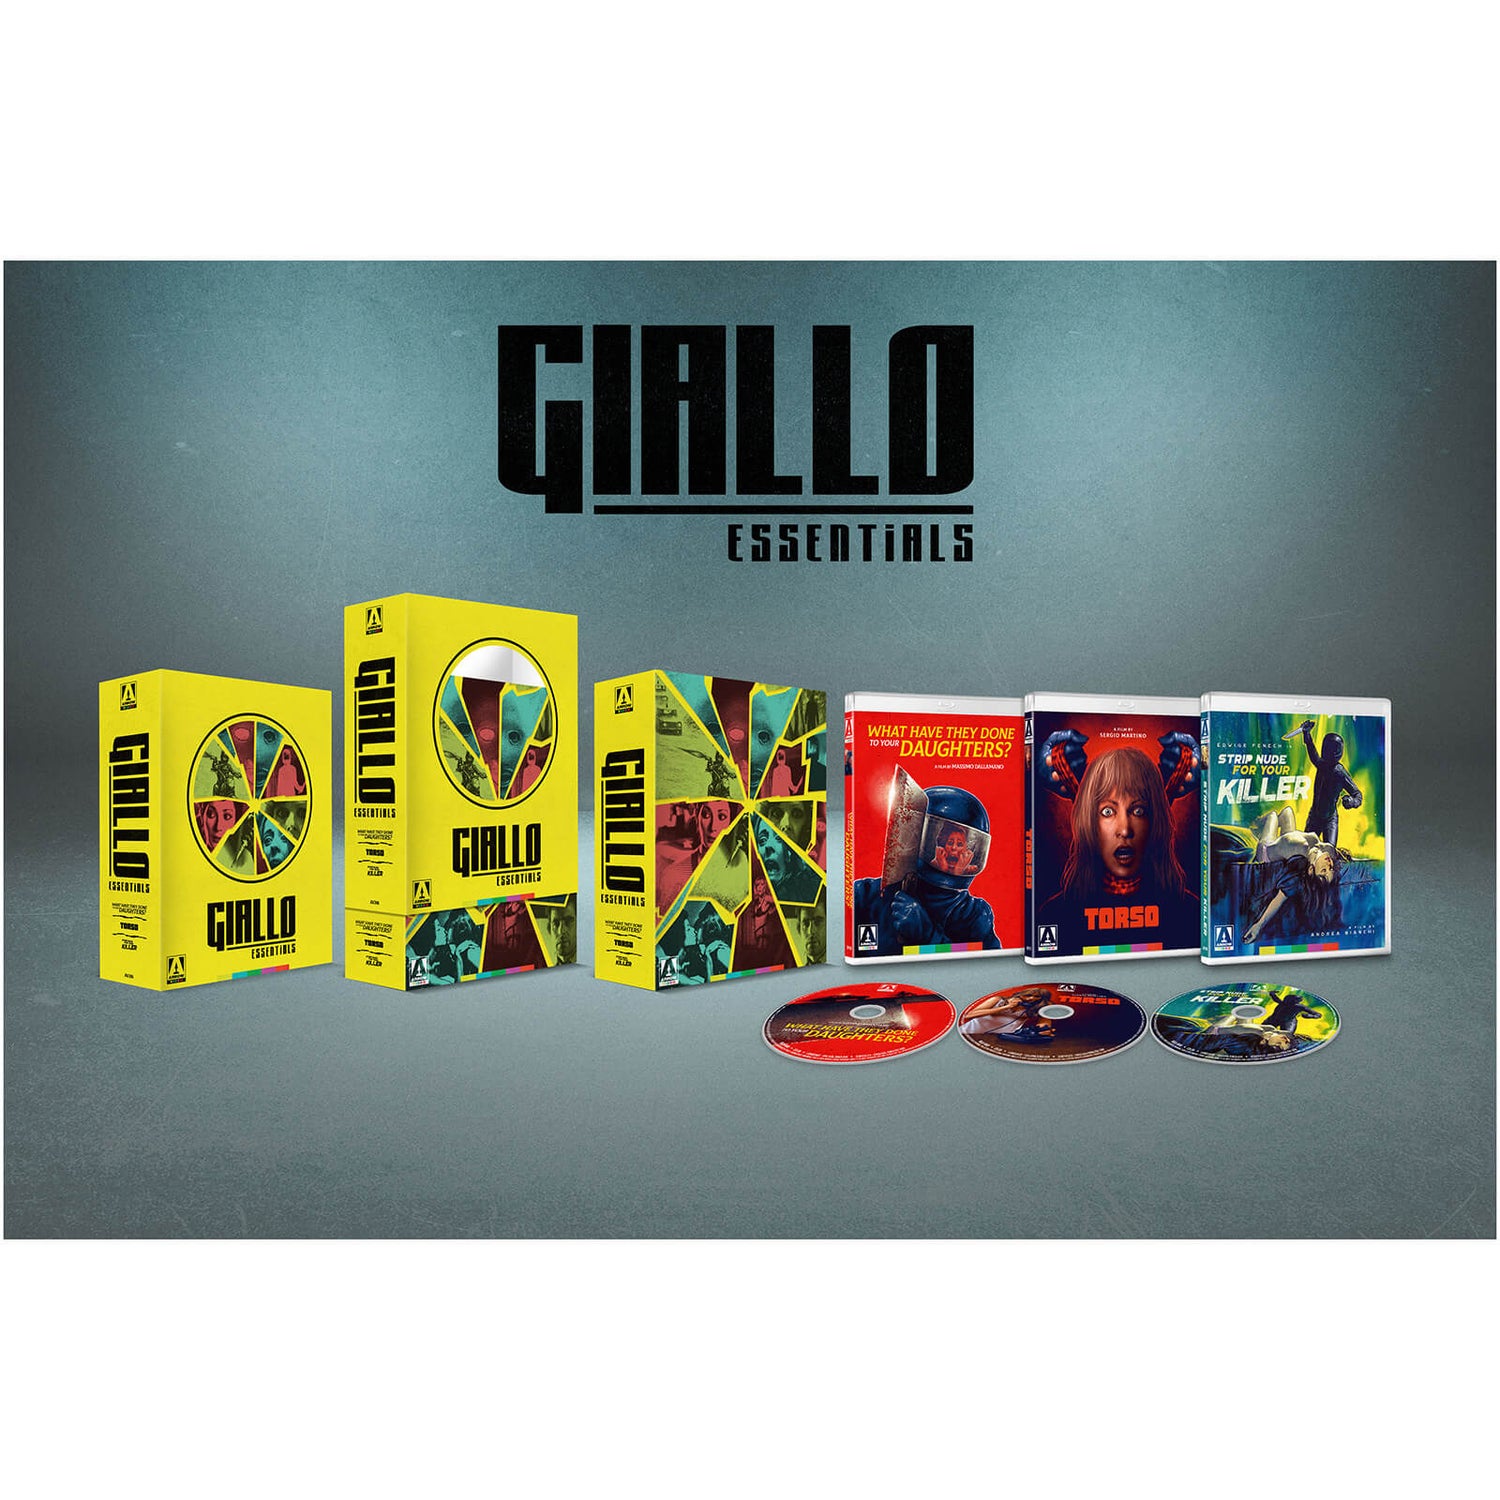 Giallo Essentials | Yellow | Limited Edition Blu-ray